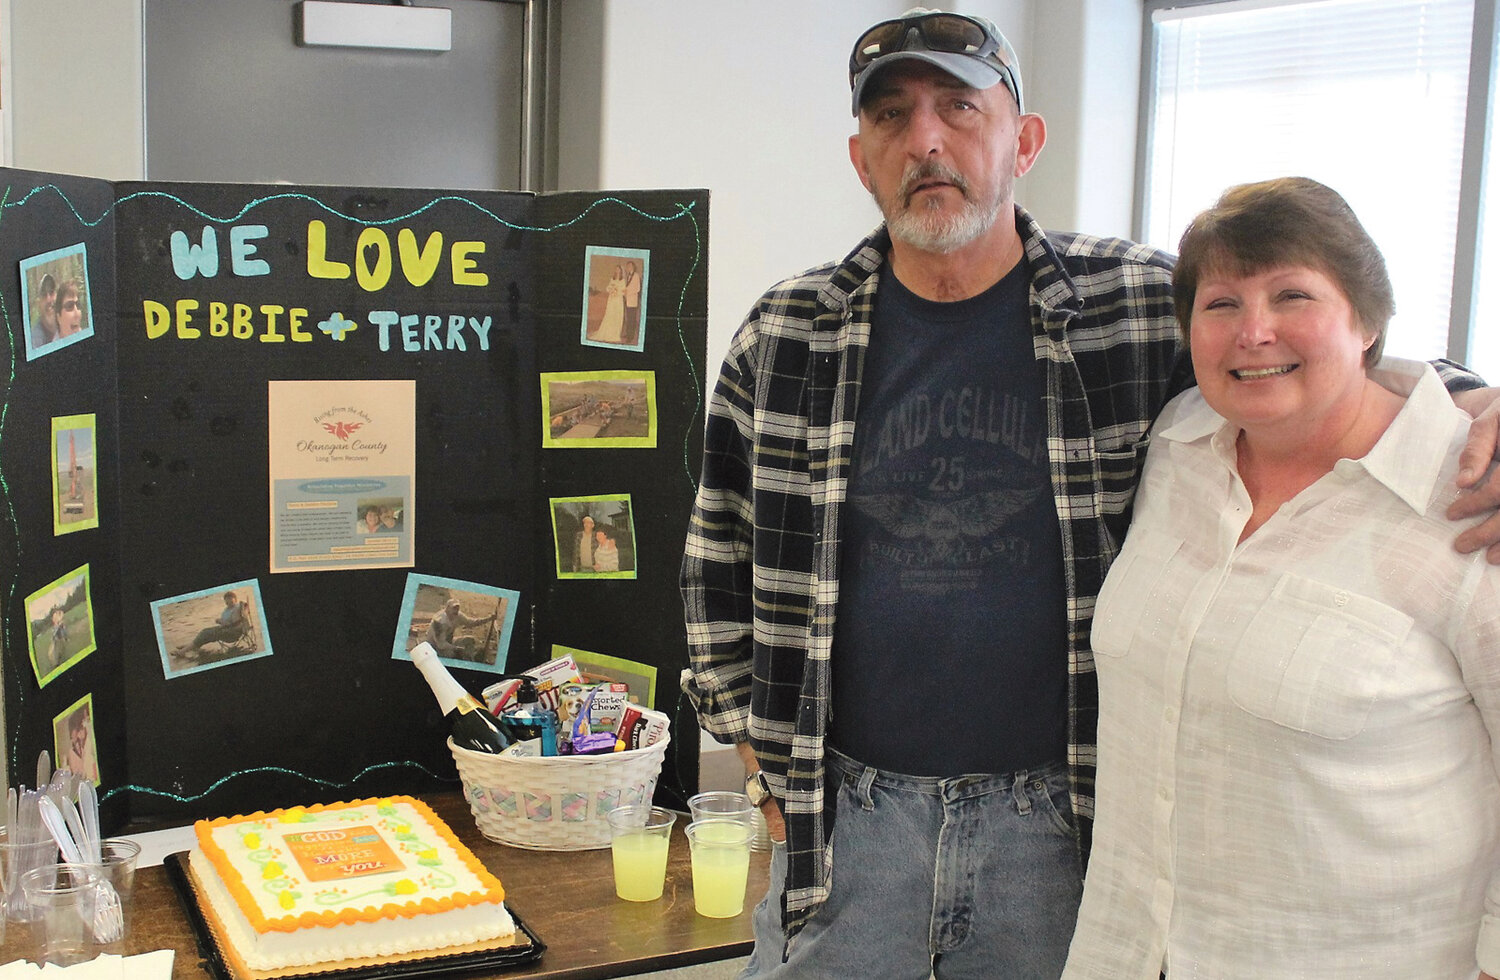 OCLTRG volunteers Terry and Debbie Parsons devoted the last two years to helping those who were affected by the fires in 2014 and 2015.